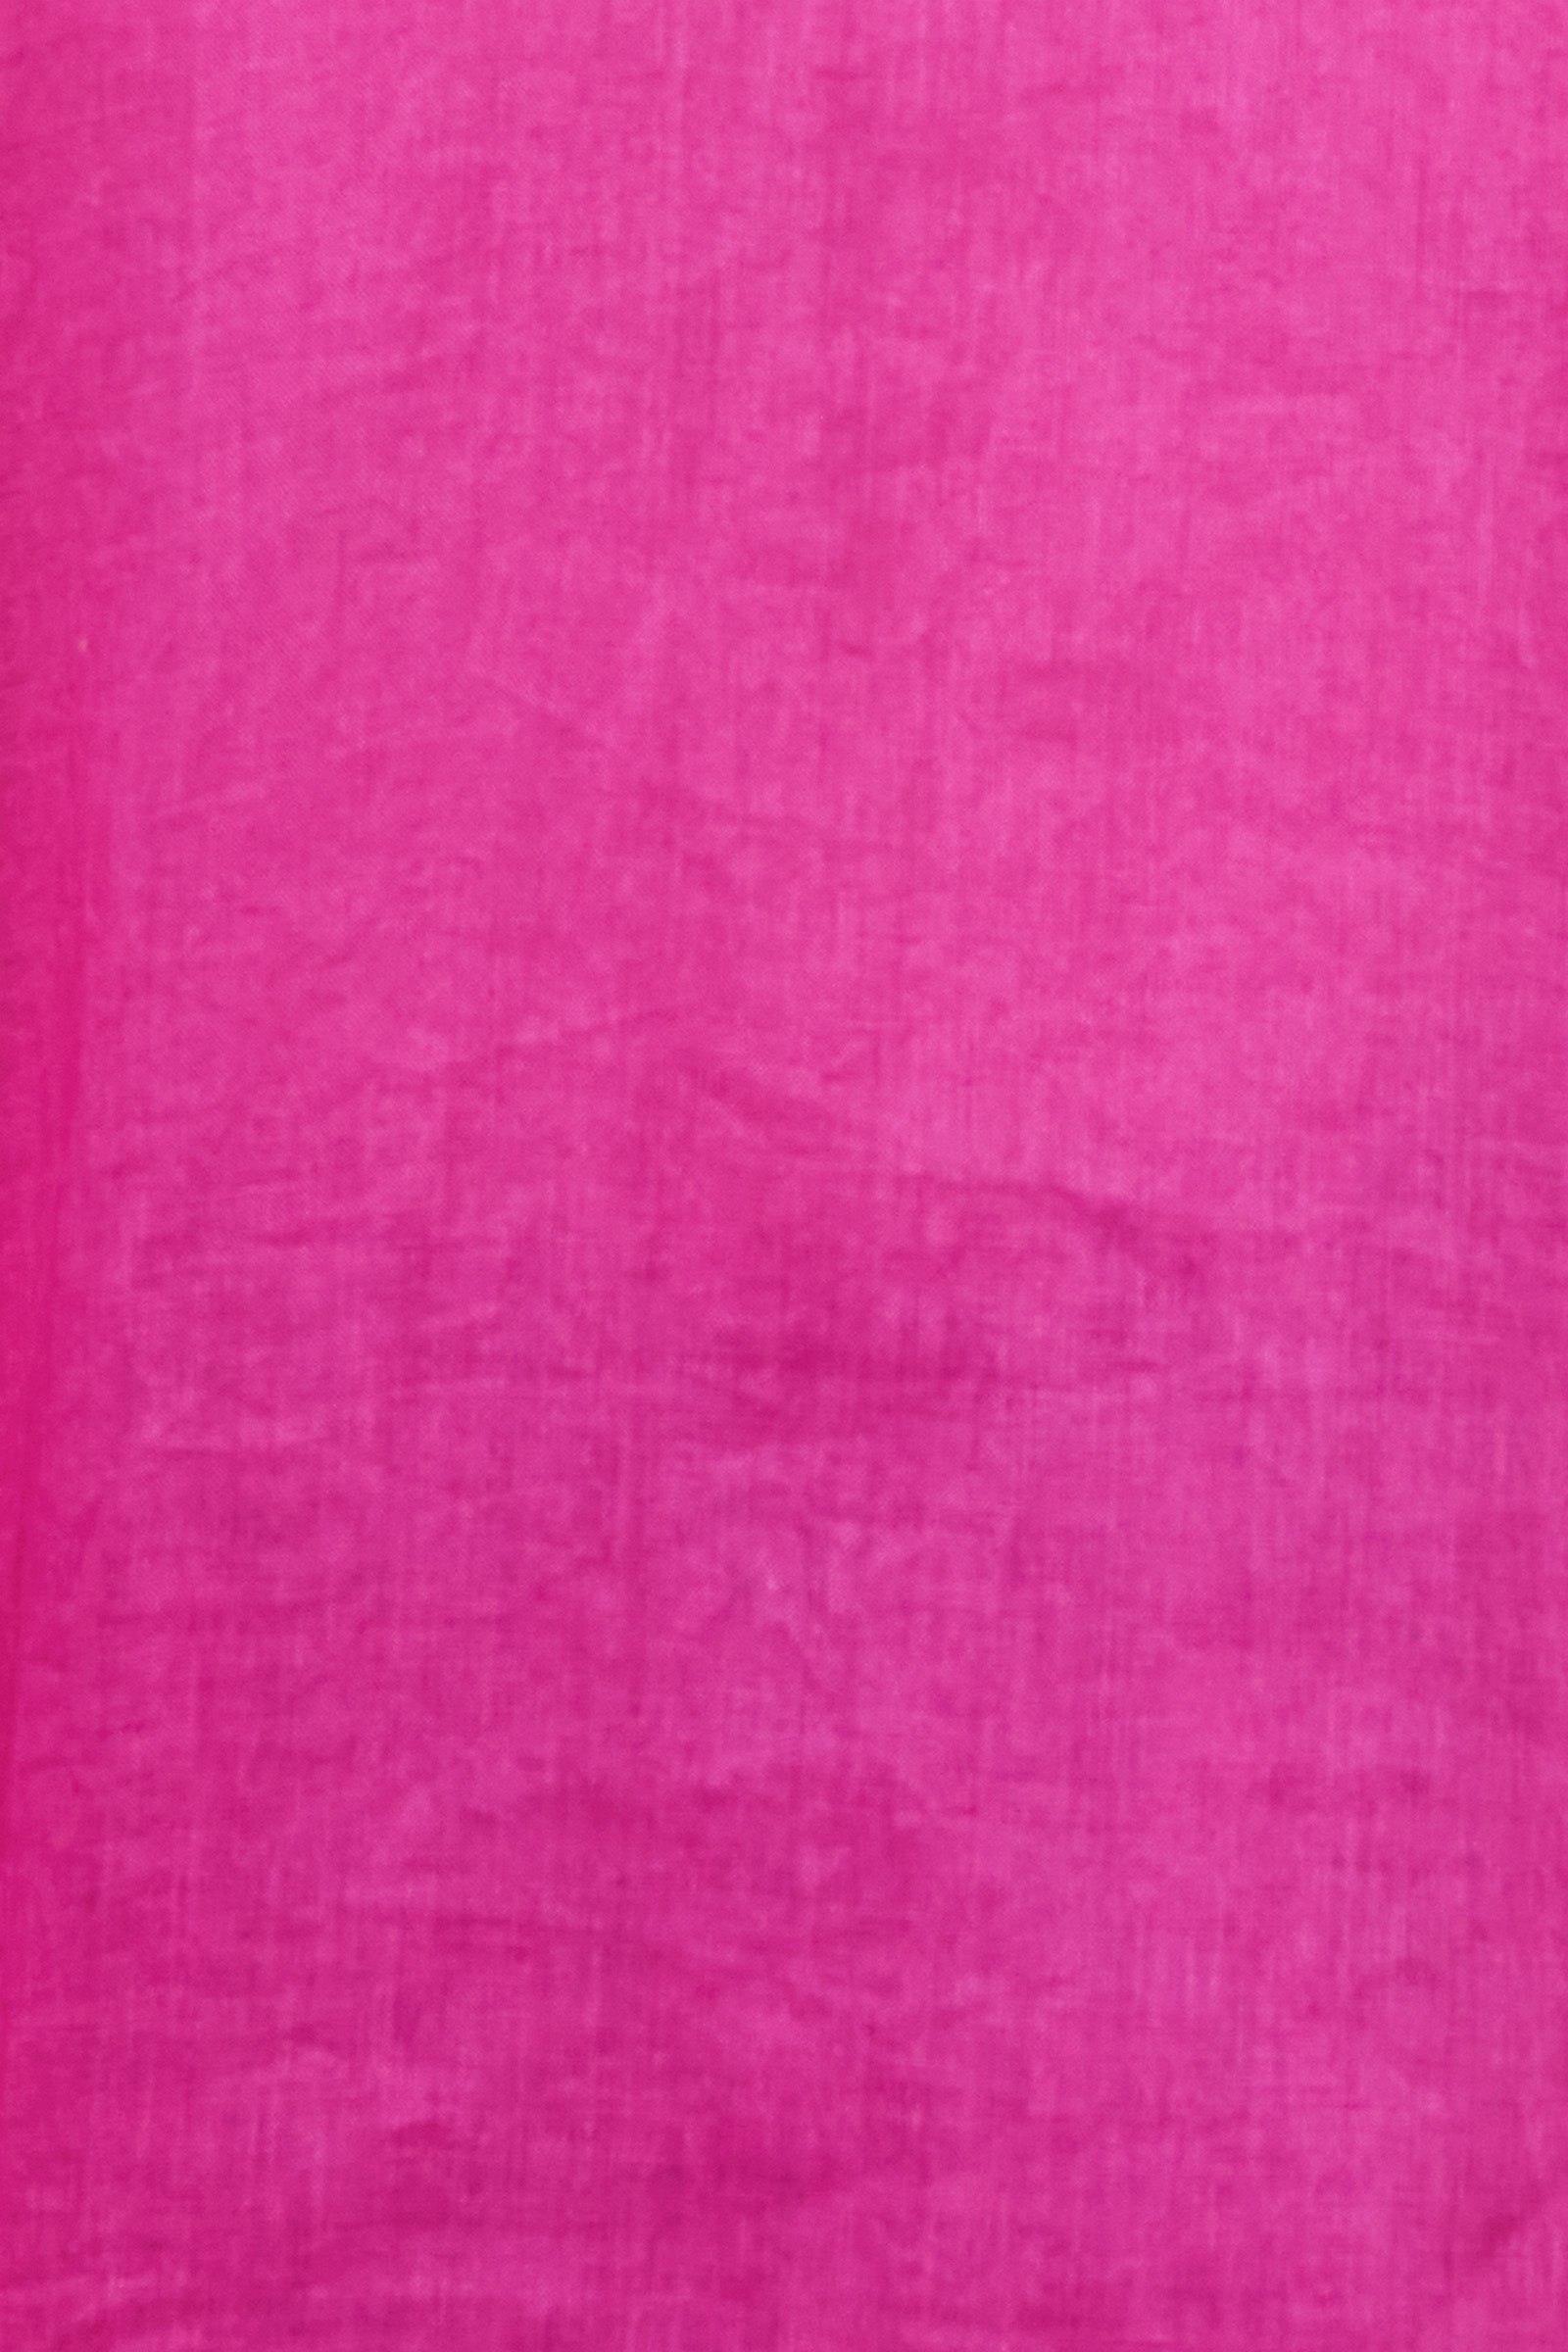 Nama Relax Top - Magenta - eb&ive Clothing - Top L/S Linen One Size